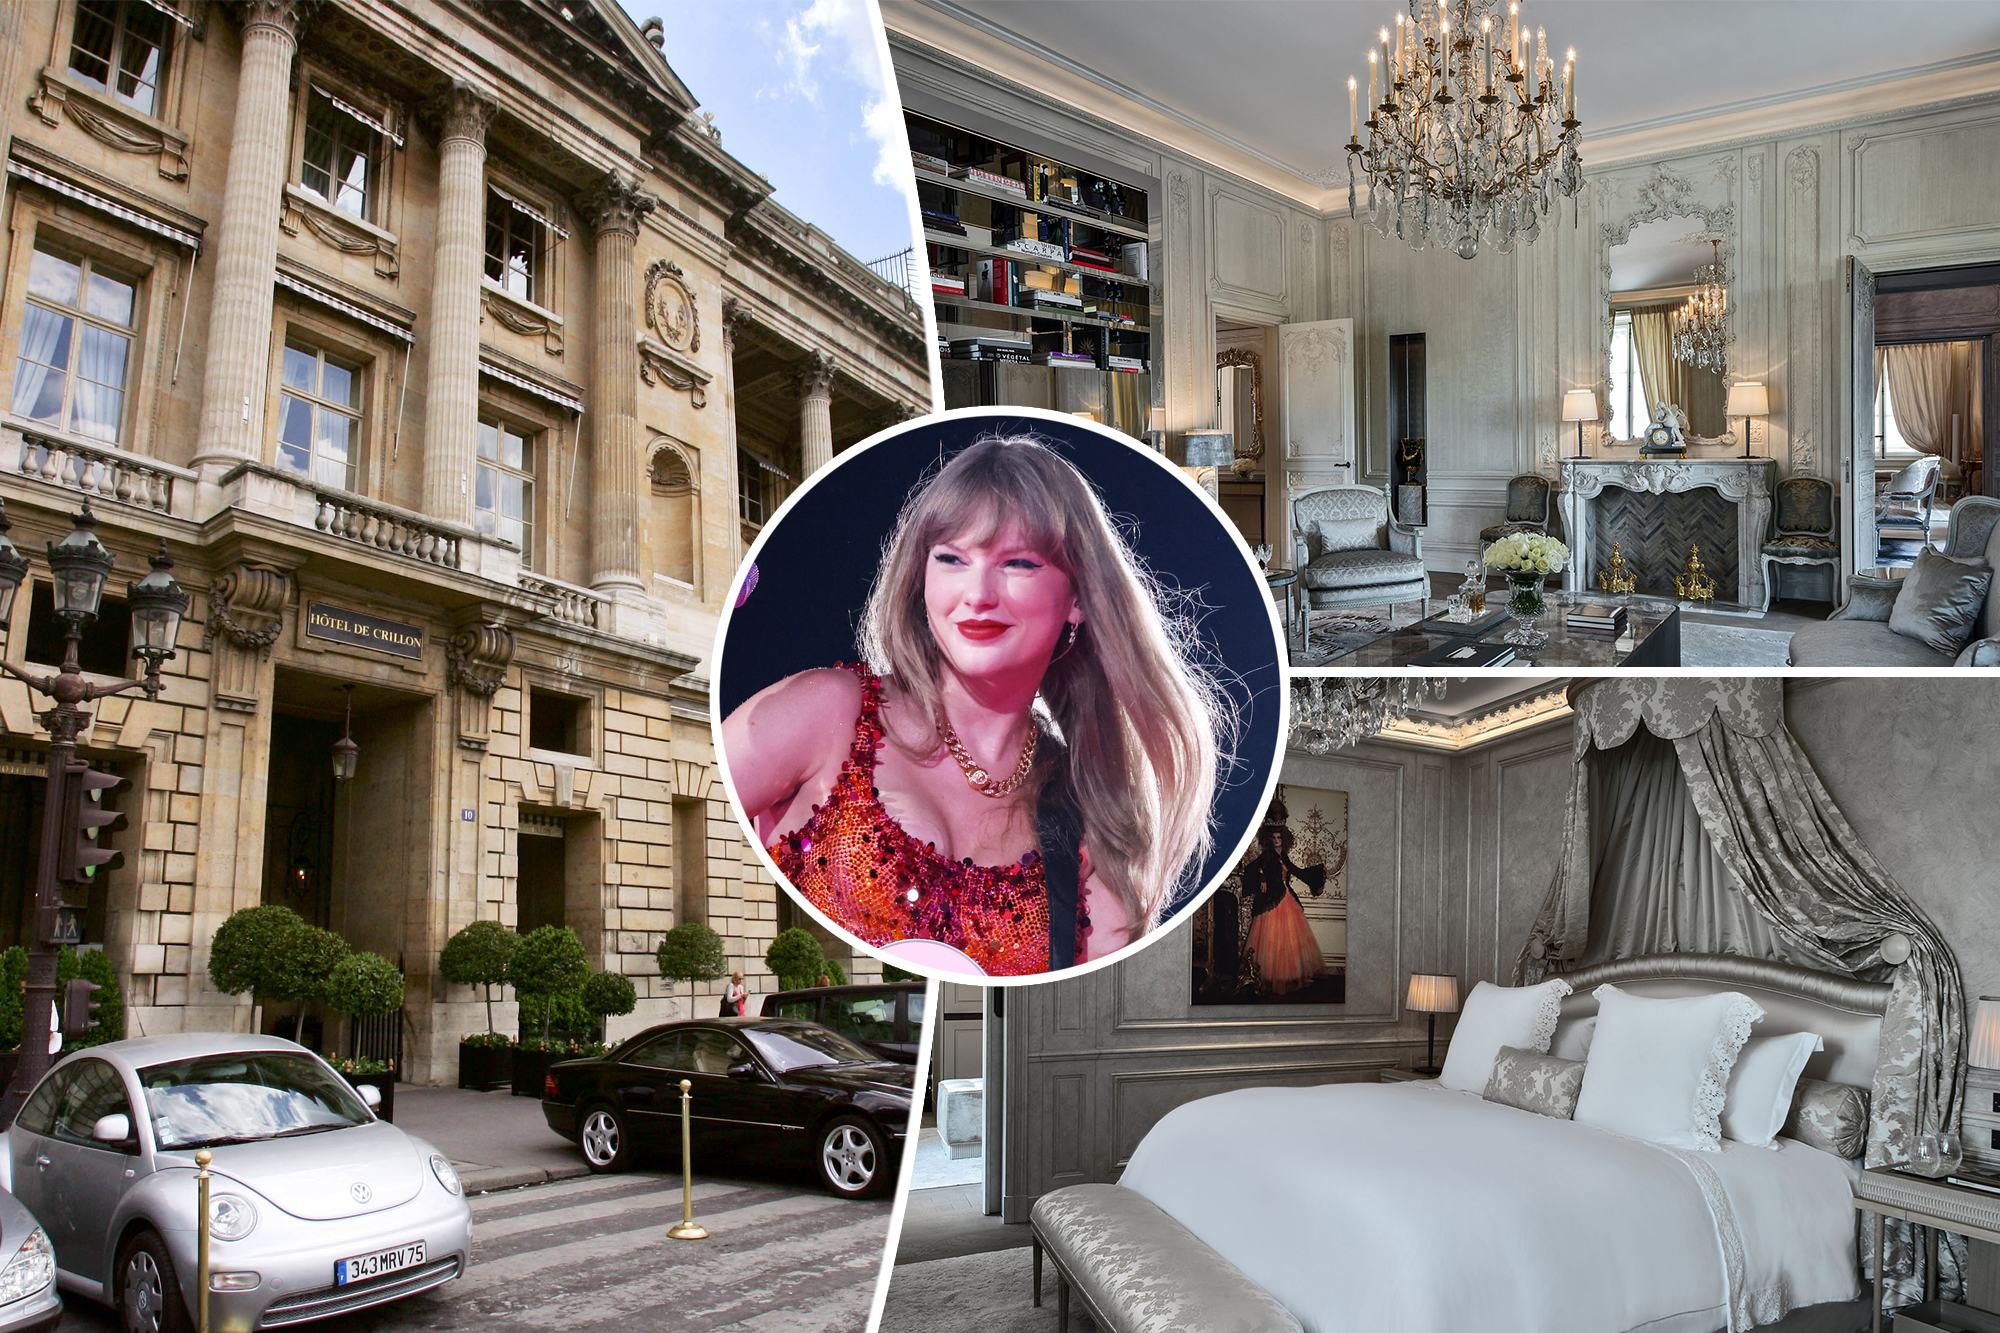 Discover the luxurious Hôtel de Crillon and its $21K-per-night suites, where Taylor Swift stayed during her Eras Tour stops